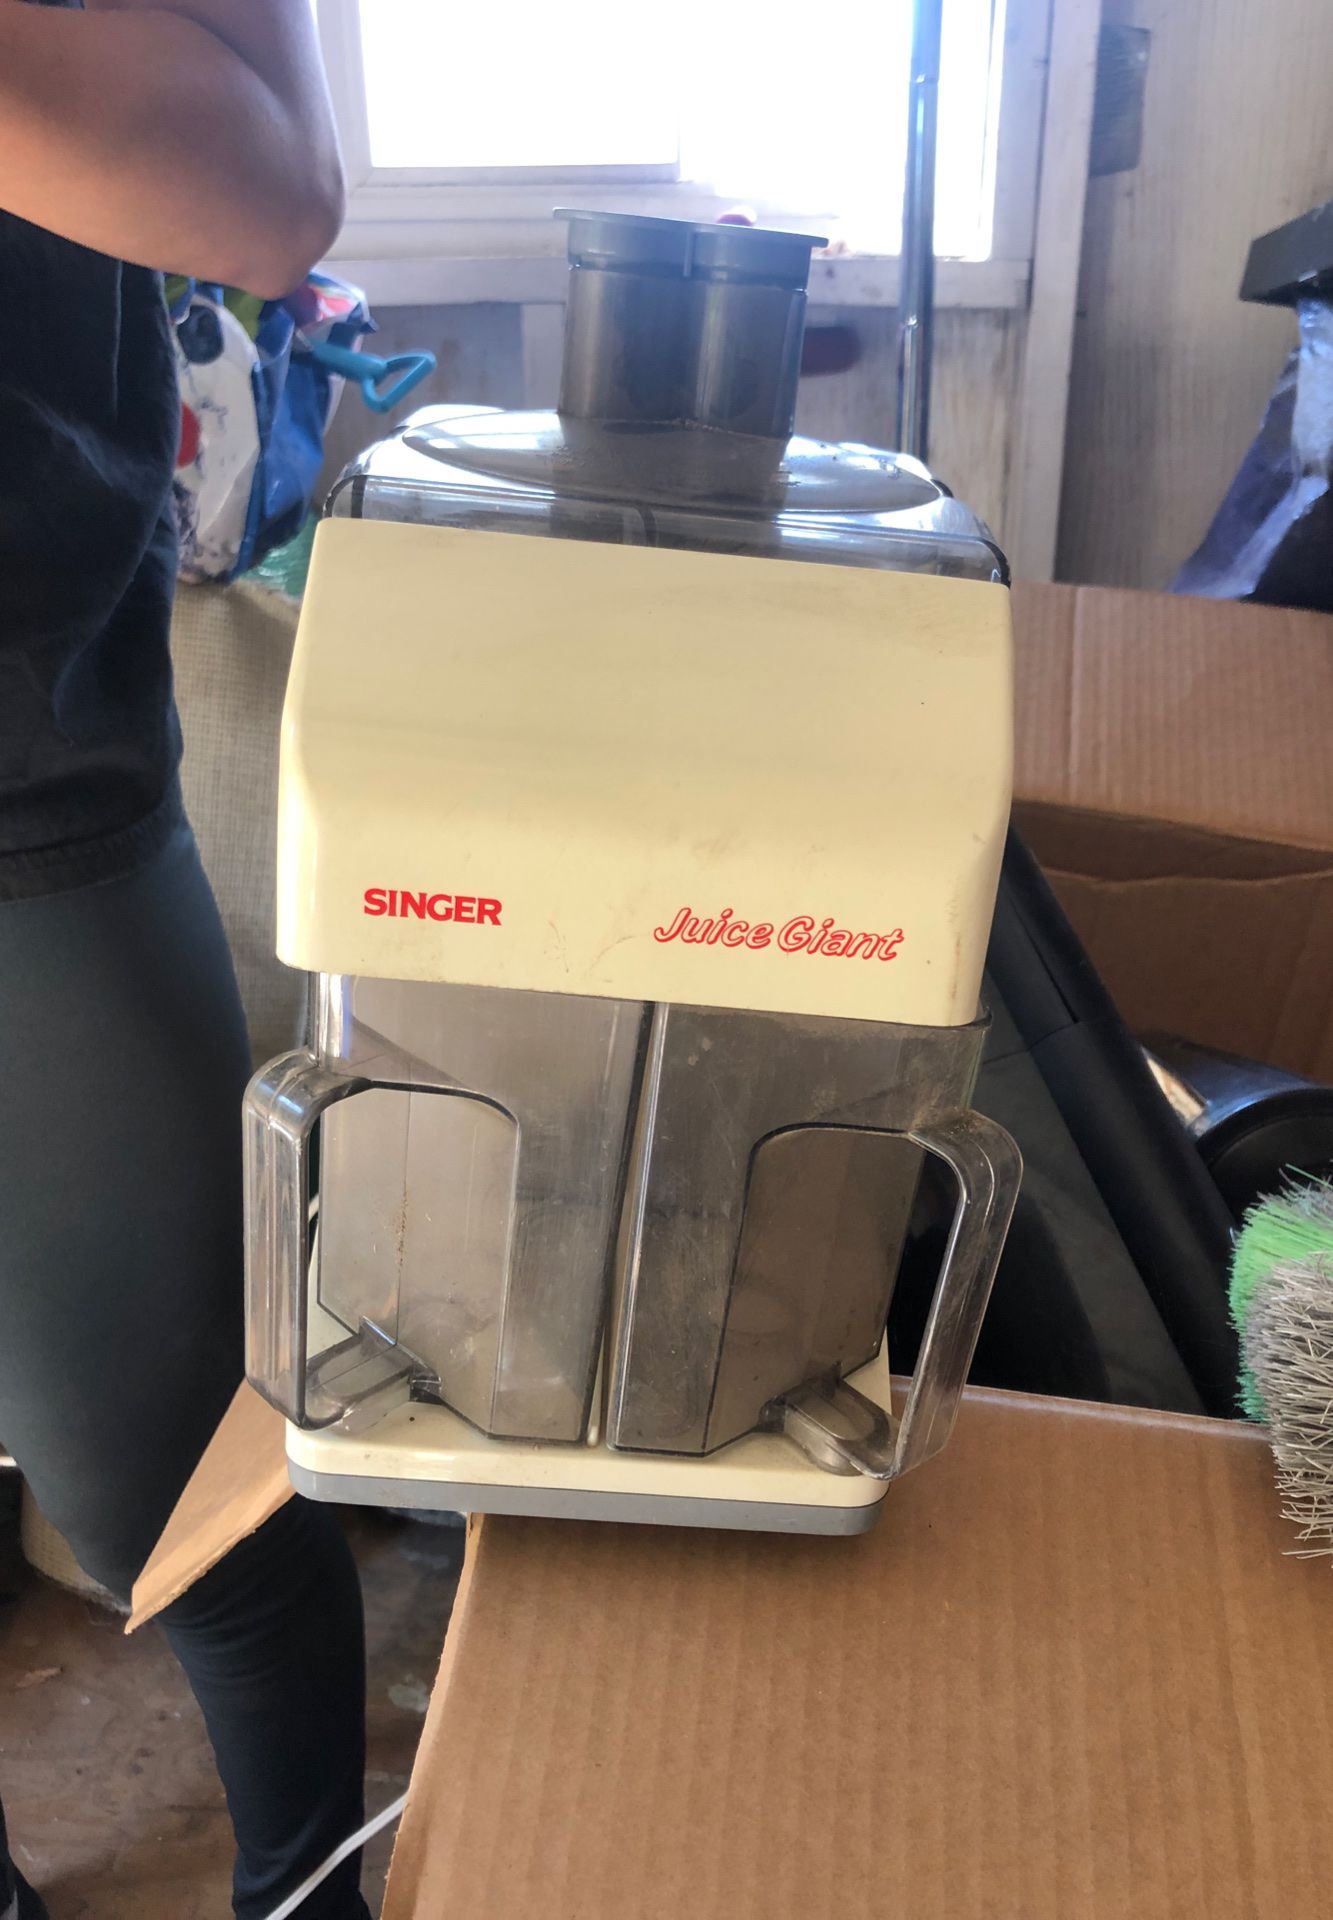 Juicer kitchen appliance going for 5 or best offer